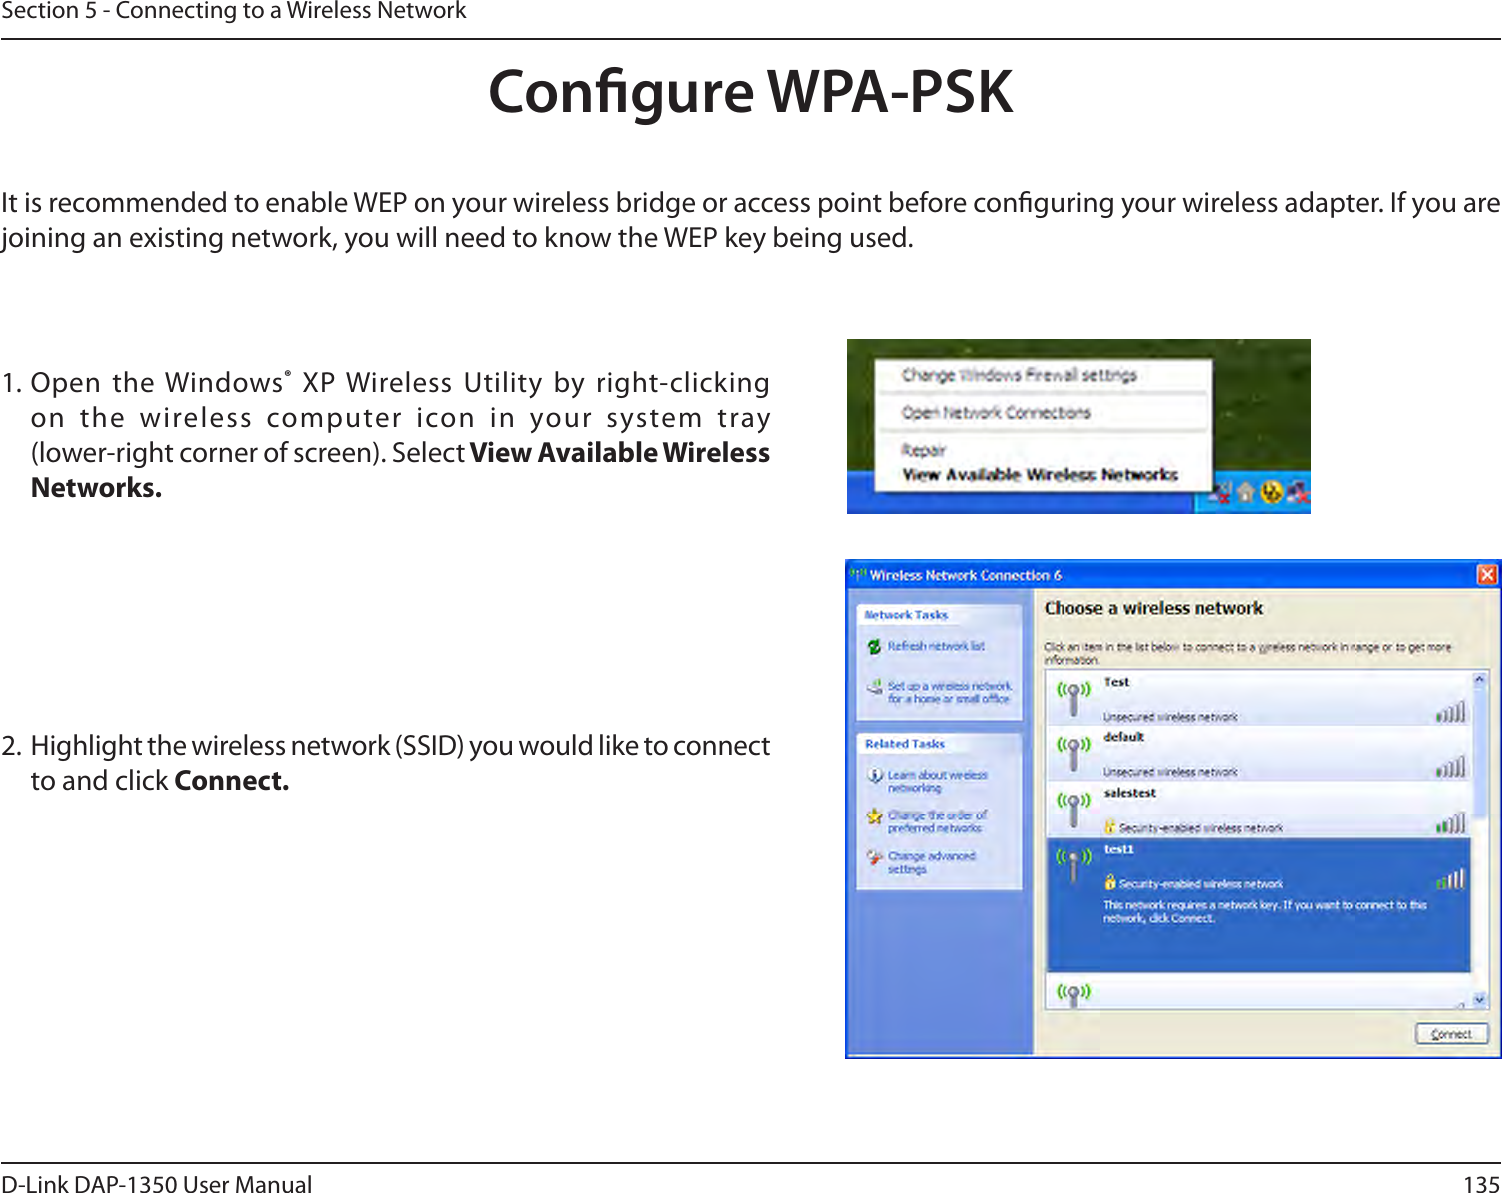 135D-Link DAP-1350 User ManualSection 5 - Connecting to a Wireless NetworkCongure WPA-PSKIt is recommended to enable WEP on your wireless bridge or access point before conguring your wireless adapter. If you are joining an existing network, you will need to know the WEP key being used.2. Highlight the wireless network (SSID) you would like to connect to and click Connect.1. Open  the Windows®  XP Wireless  Utility  by  right-clicking on  the  wireless  computer  icon  in  your  system  tray  (lower-right corner of screen). Select View Available Wireless Networks. 